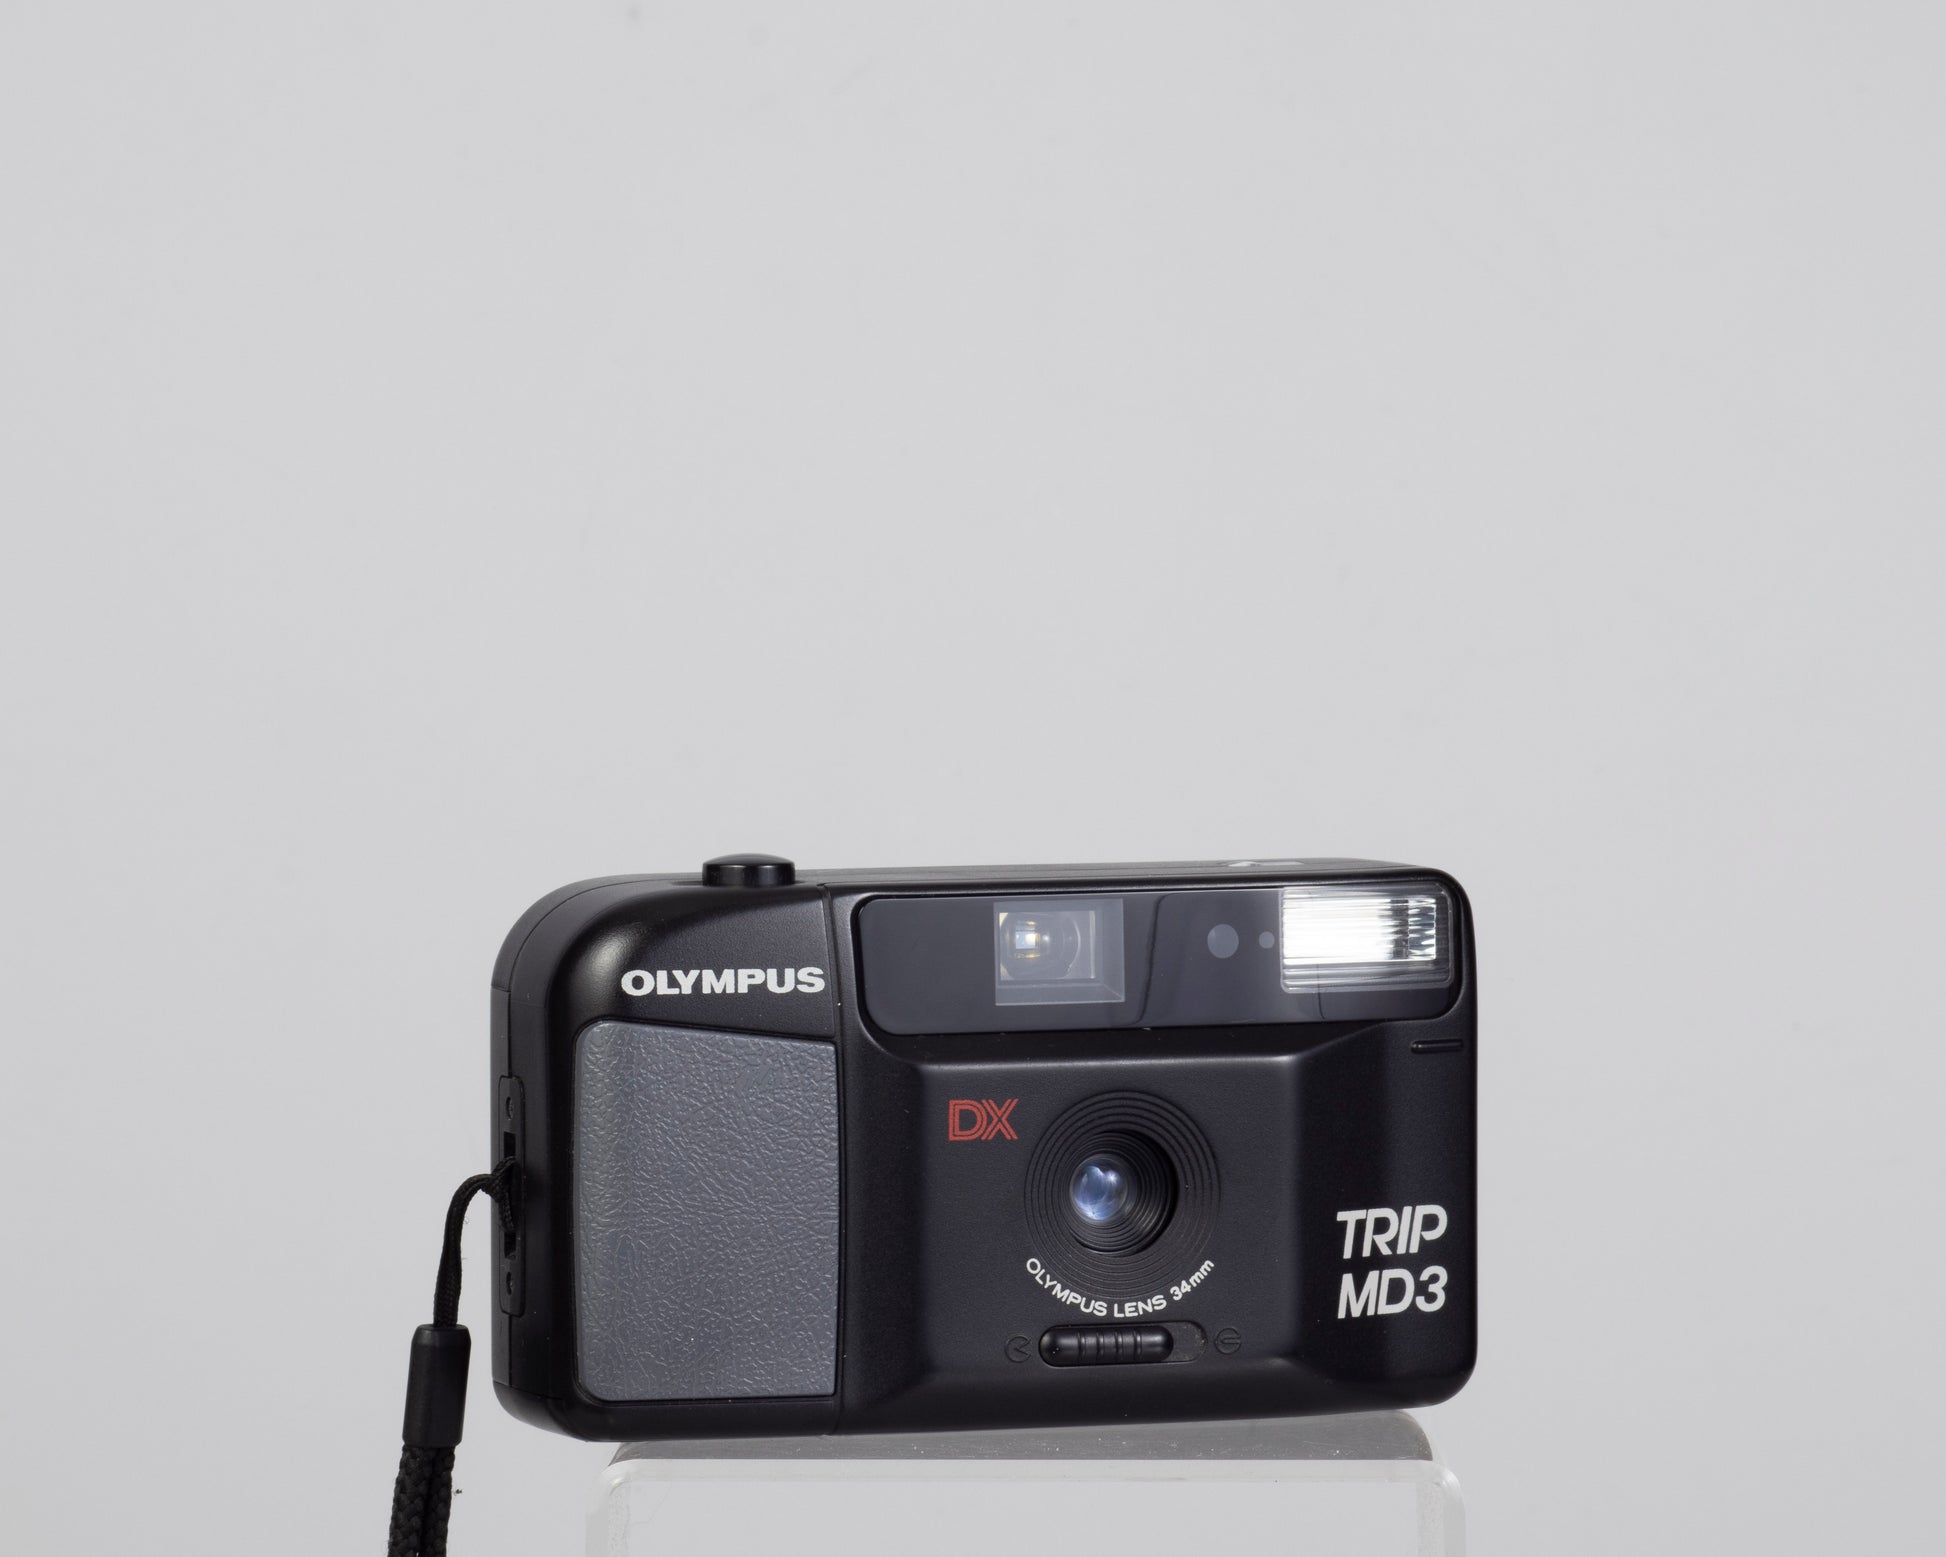 The Olympus Trip MD3 is a simple compact 35mm film camera featuring a fixed 34mm lens.